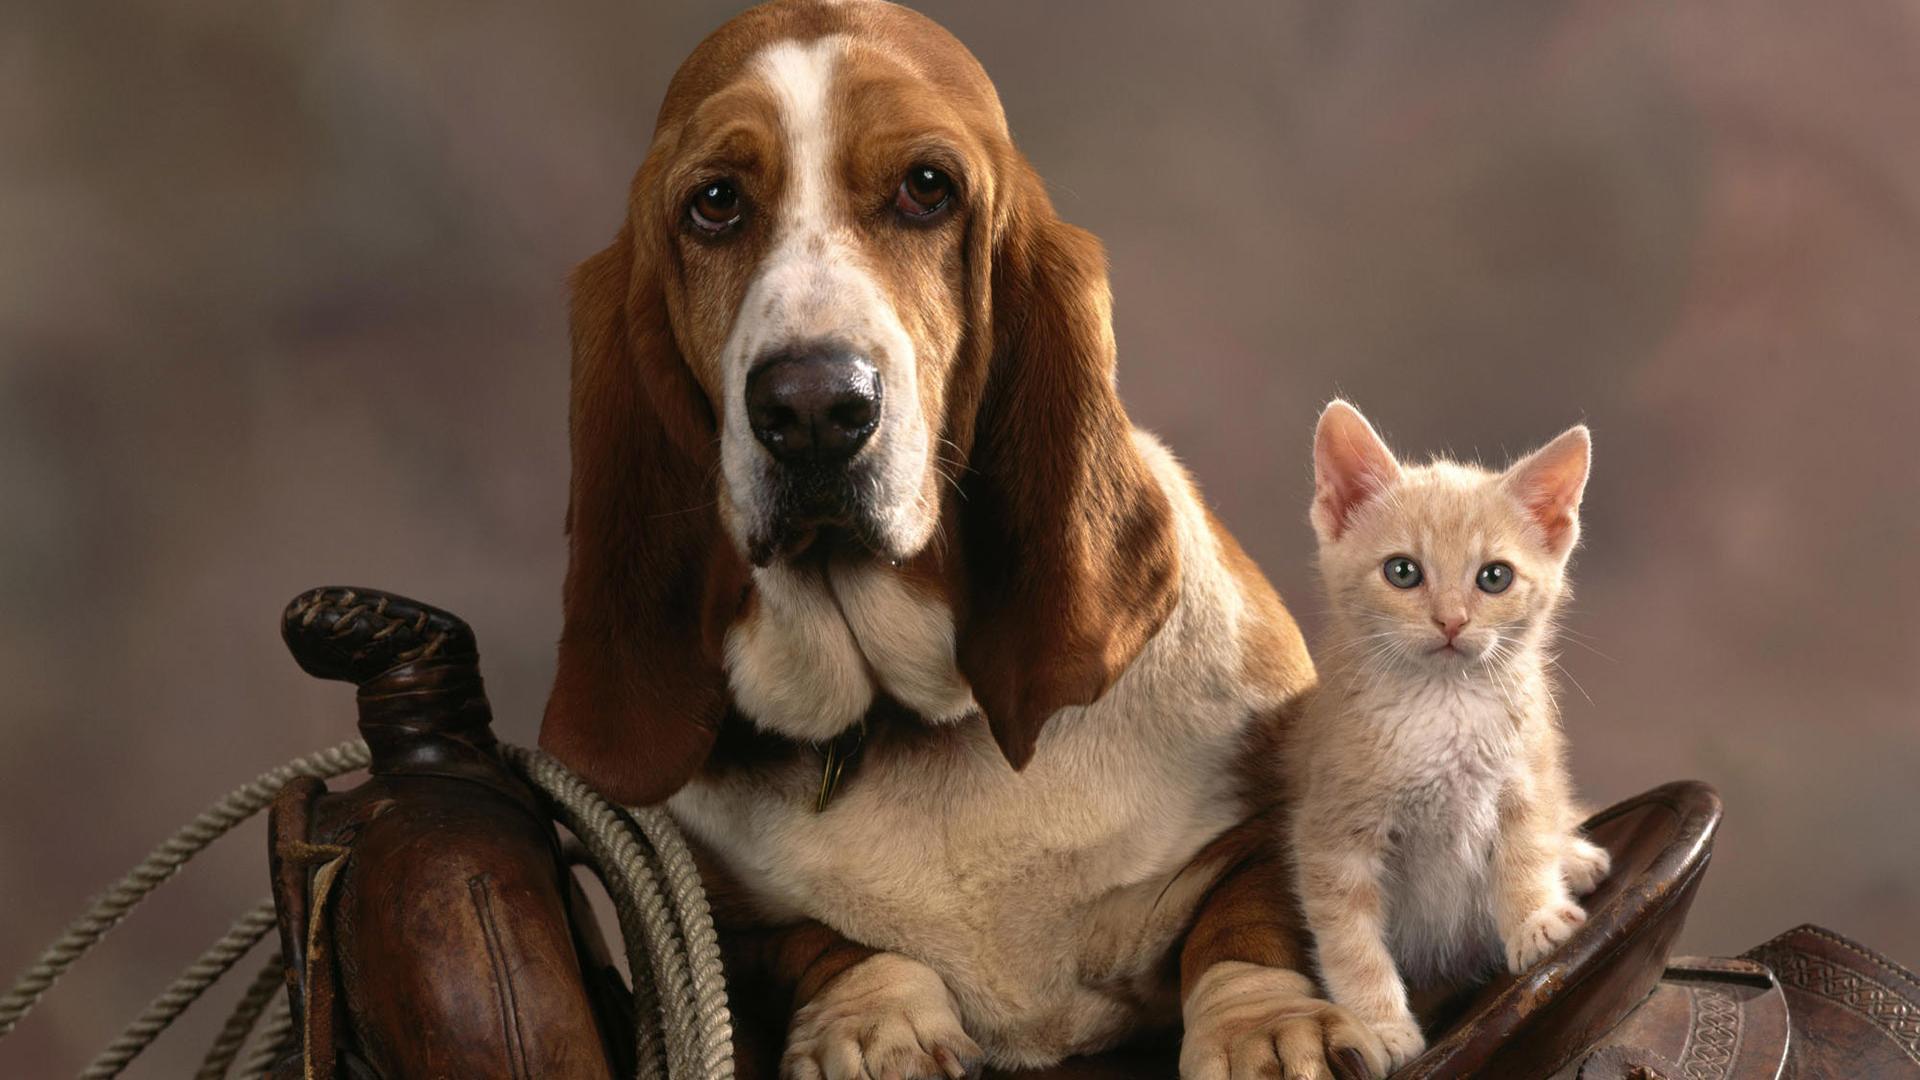 Cat And Dog Wallpapers - Wallpaper Cave